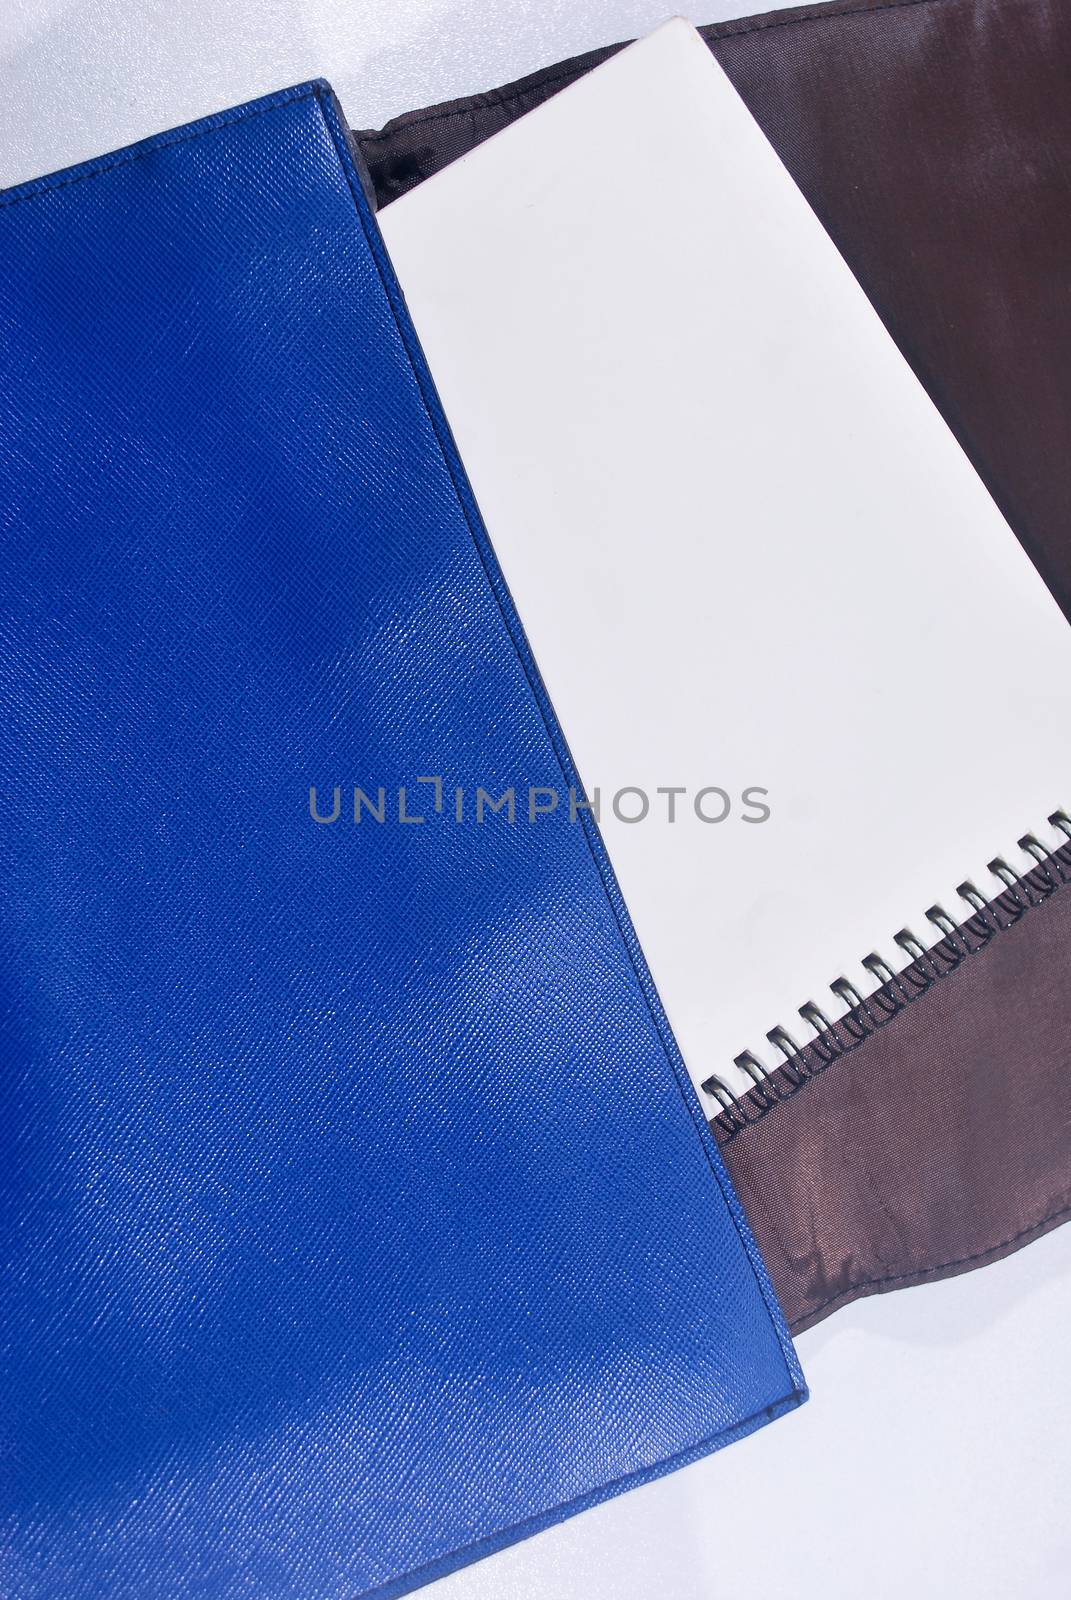 Blue leather bag on a white background.